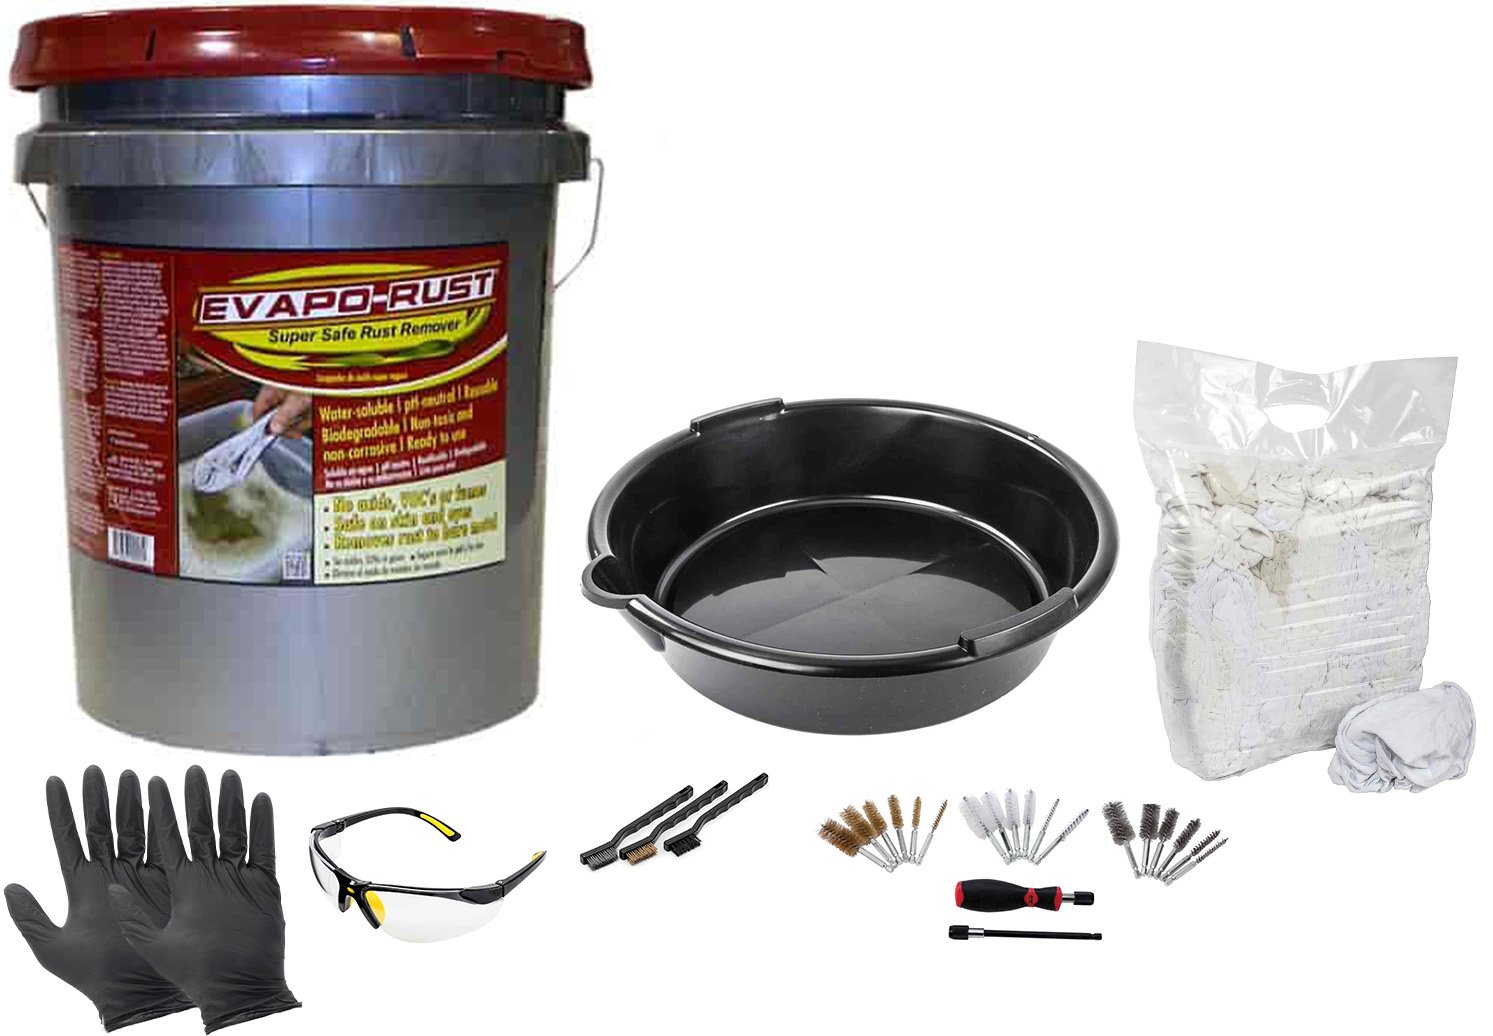 Evapo-Rust ER013K (ER013): Evapo-Rust Rust Remover Cleaning Kit  Includes:  5-Gallon Rust Remover, 7-Quart Drain Pan, X-Large Nitrile Gloves, Safety  Glasses, 3-Piece Wire Brush Set, 20-Piece Engine Brush Kit, Cotton Shop  Rags 